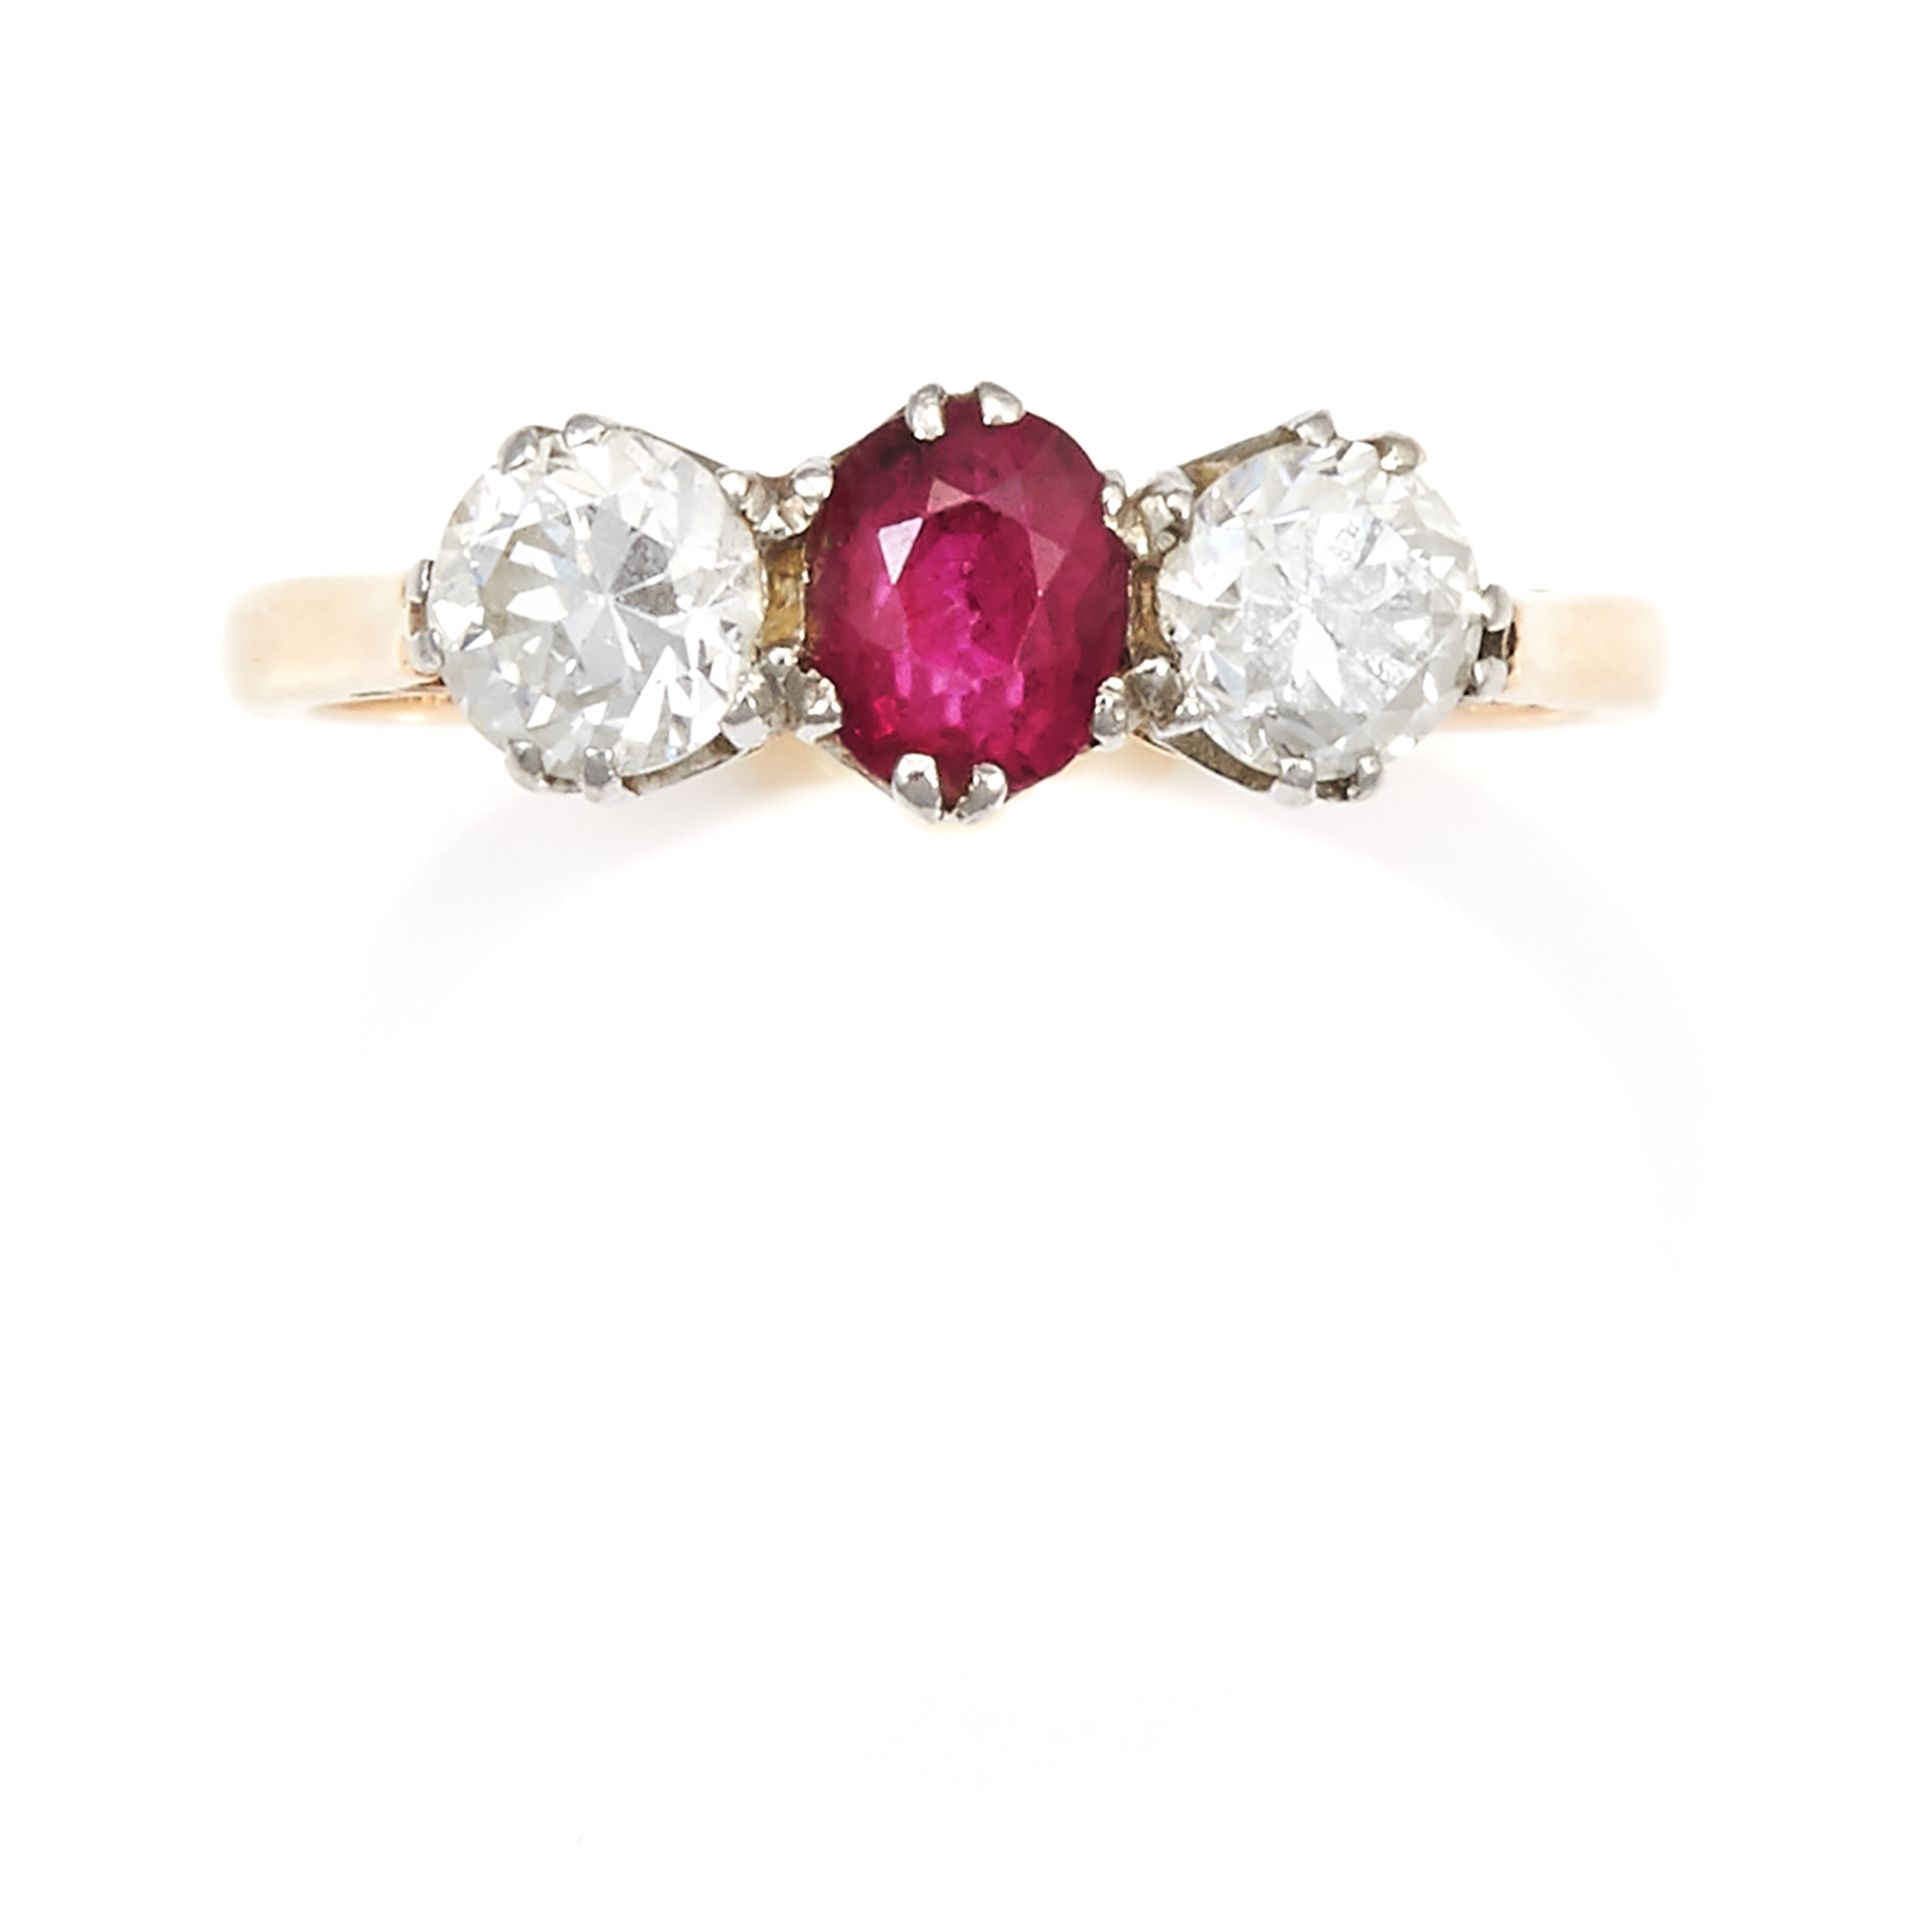 AN ANTIQUE RUBY AND DIAMOND THREE STONE RING in 18ct yellow gold and platinum, the central oval